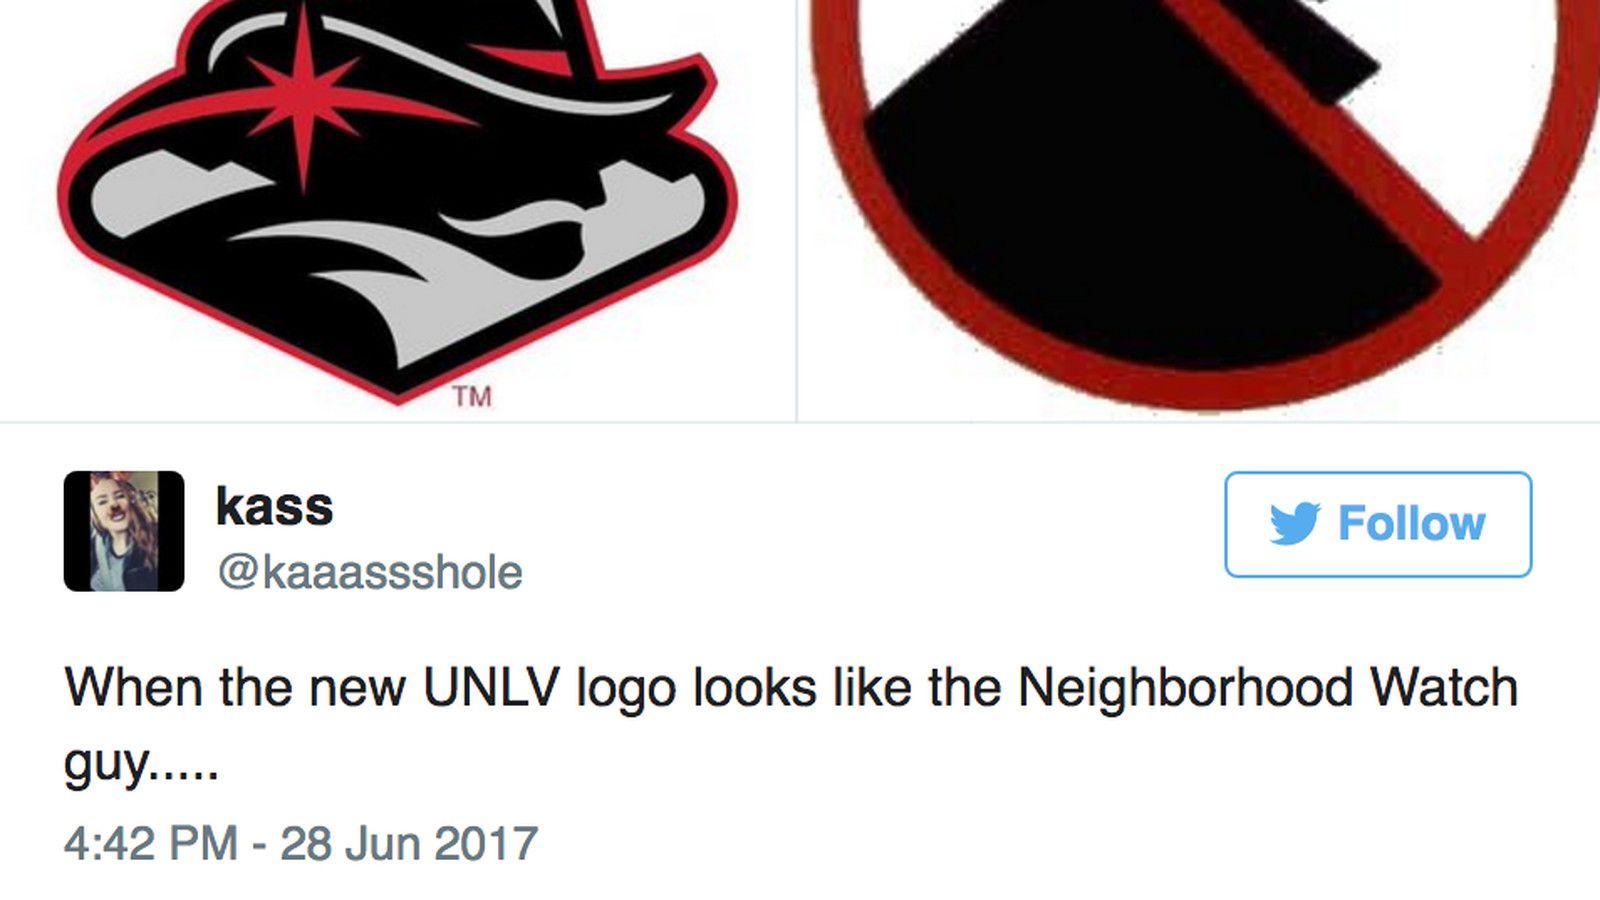 UNLV Logo - What does UNLV's complicated new logo look like to you? - SBNation.com